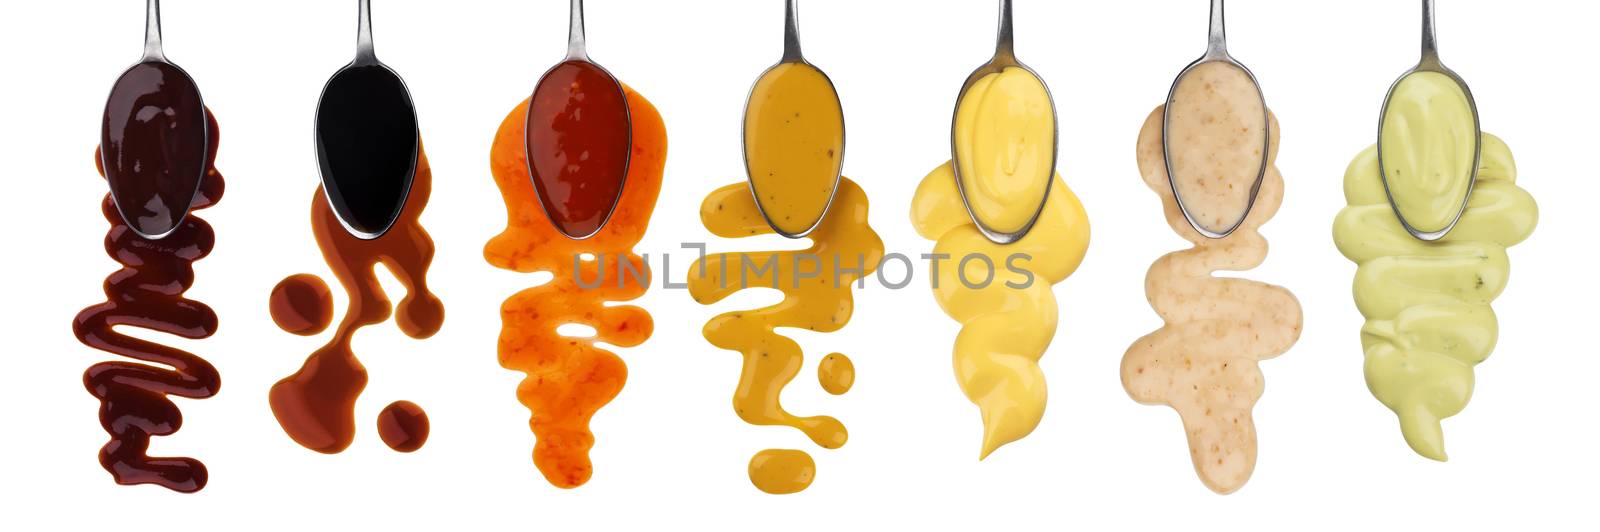 Different sauces with spoons isolated on white background by xamtiw